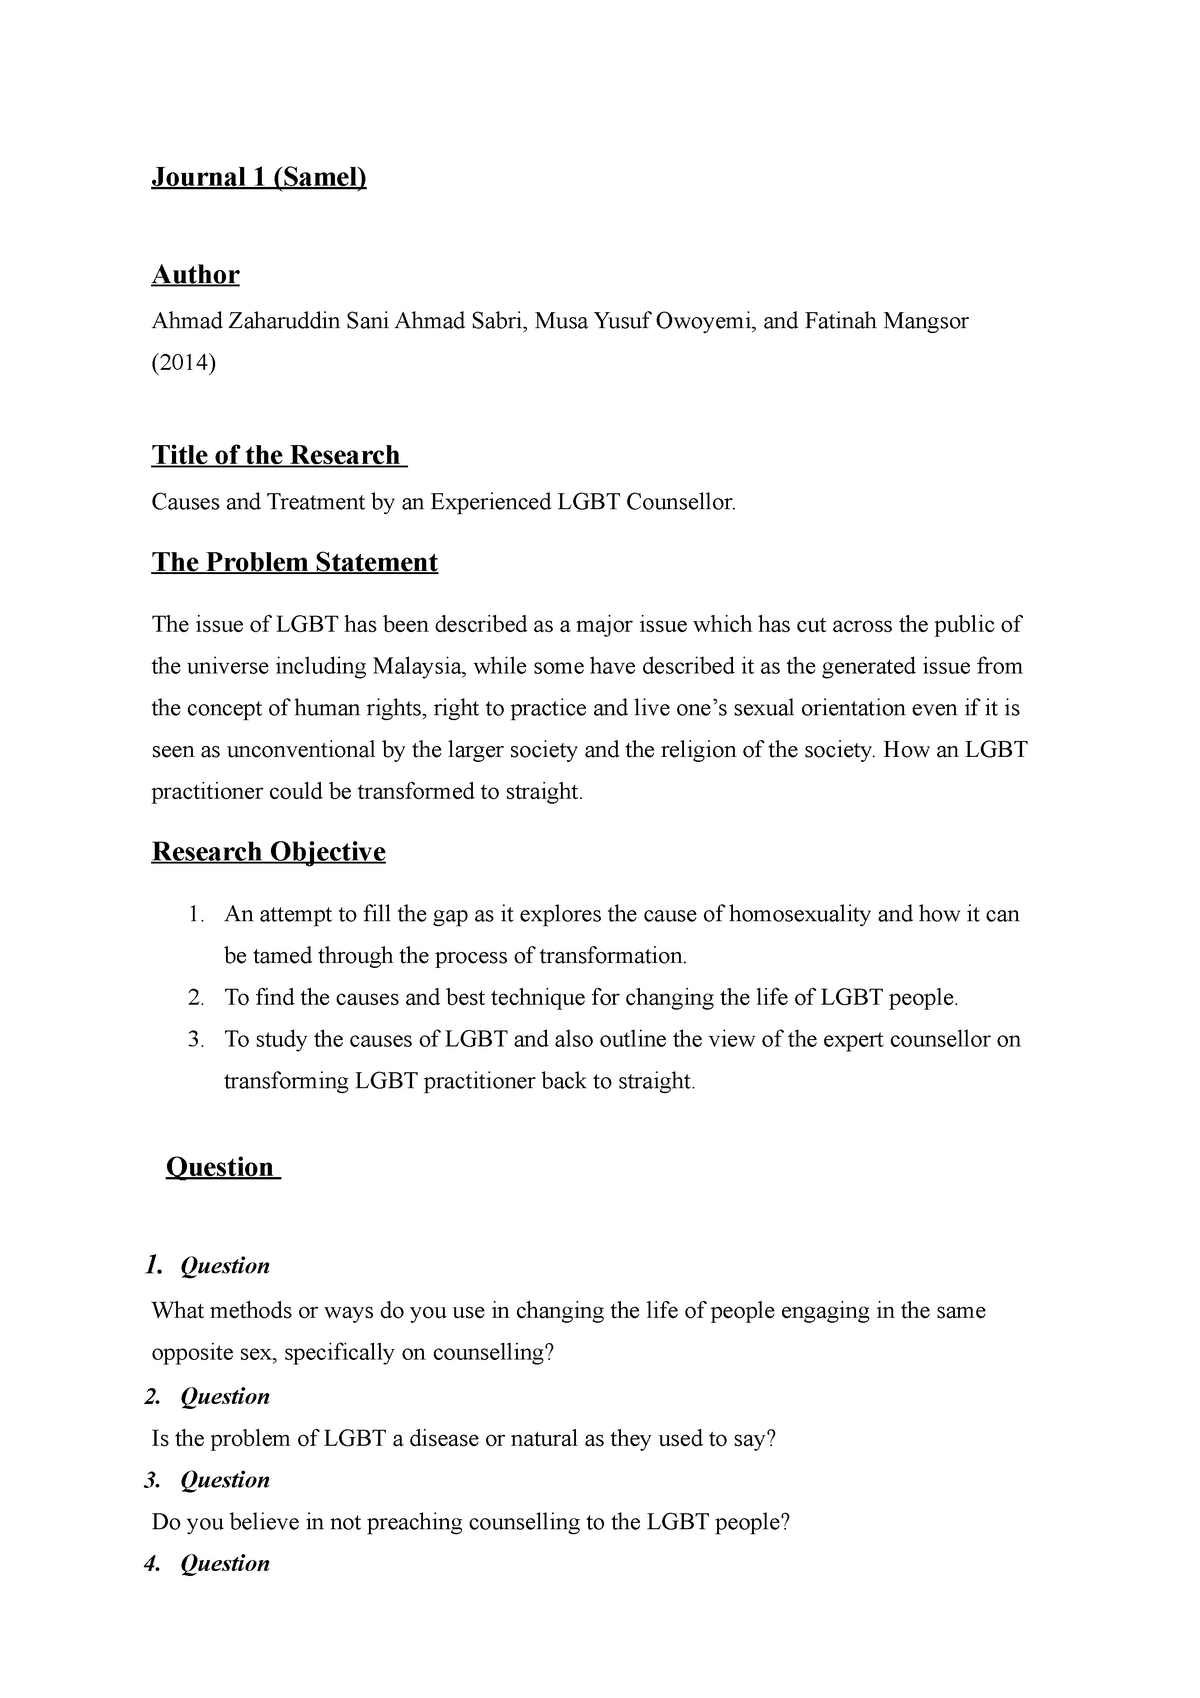 research question for lgbtq